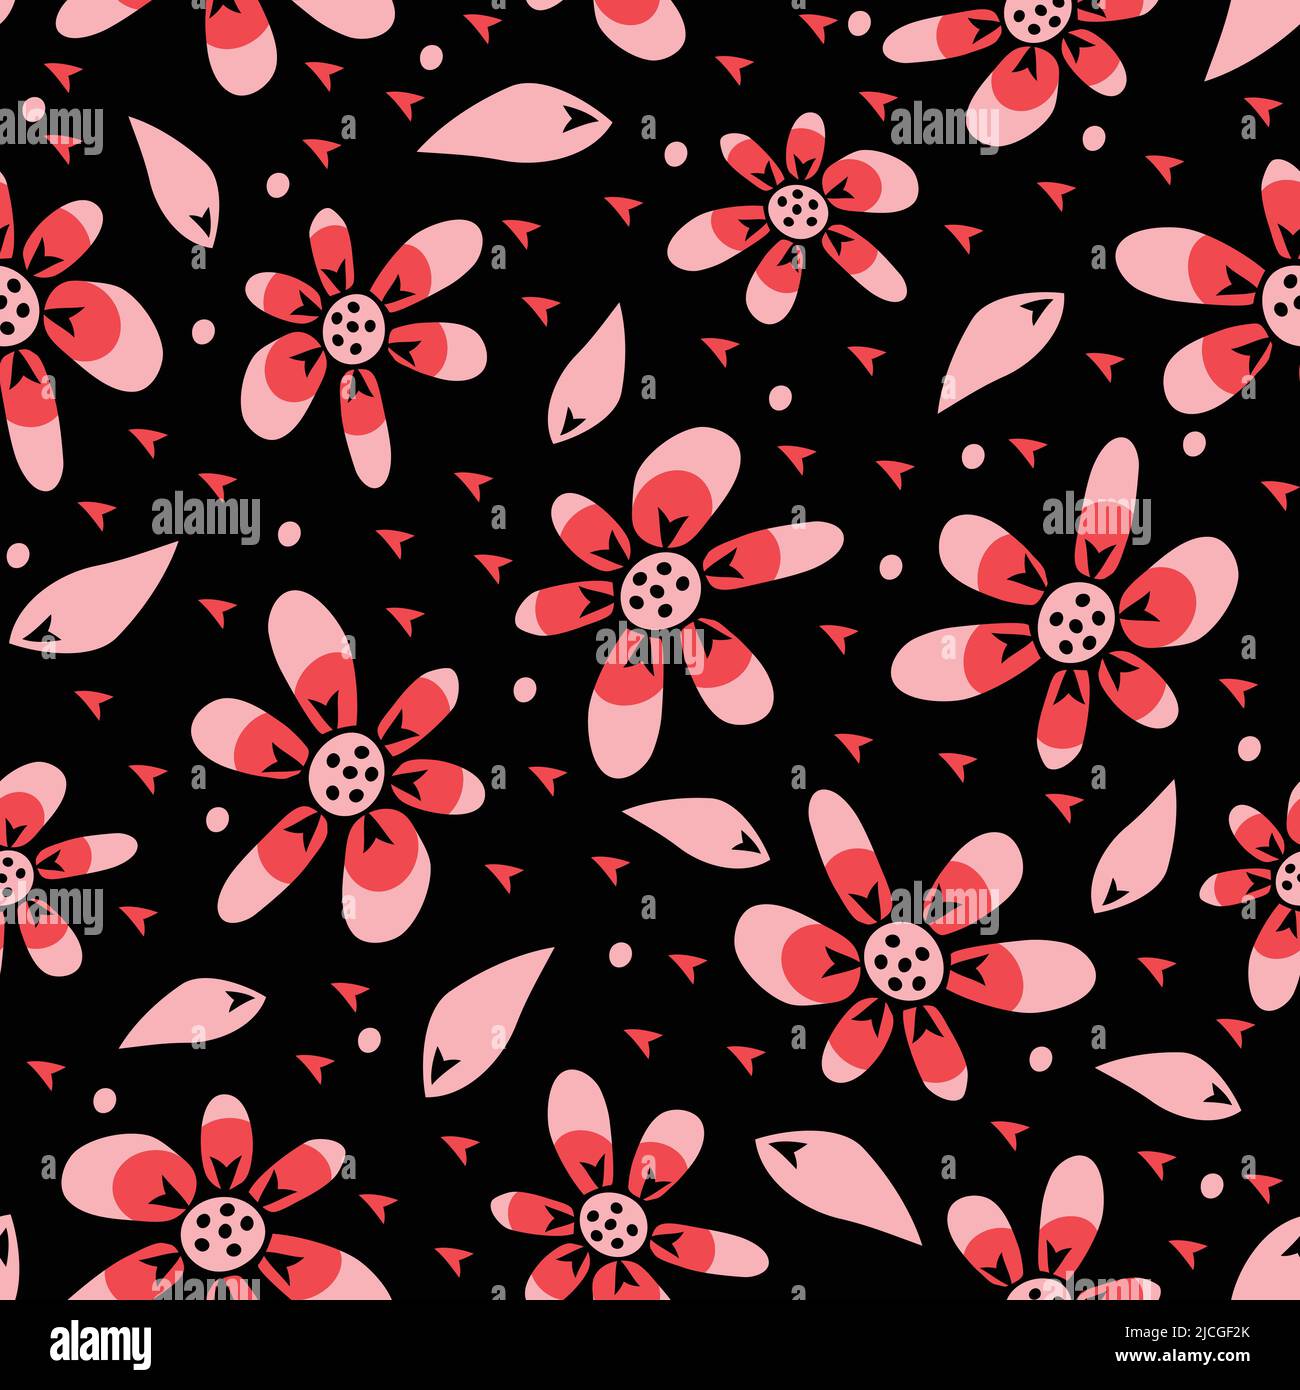 Seamless vector pattern with pink flowers o black background. Simple hand drawn floral wallpaper design. Daisy meadow fashion textile. Stock Vector